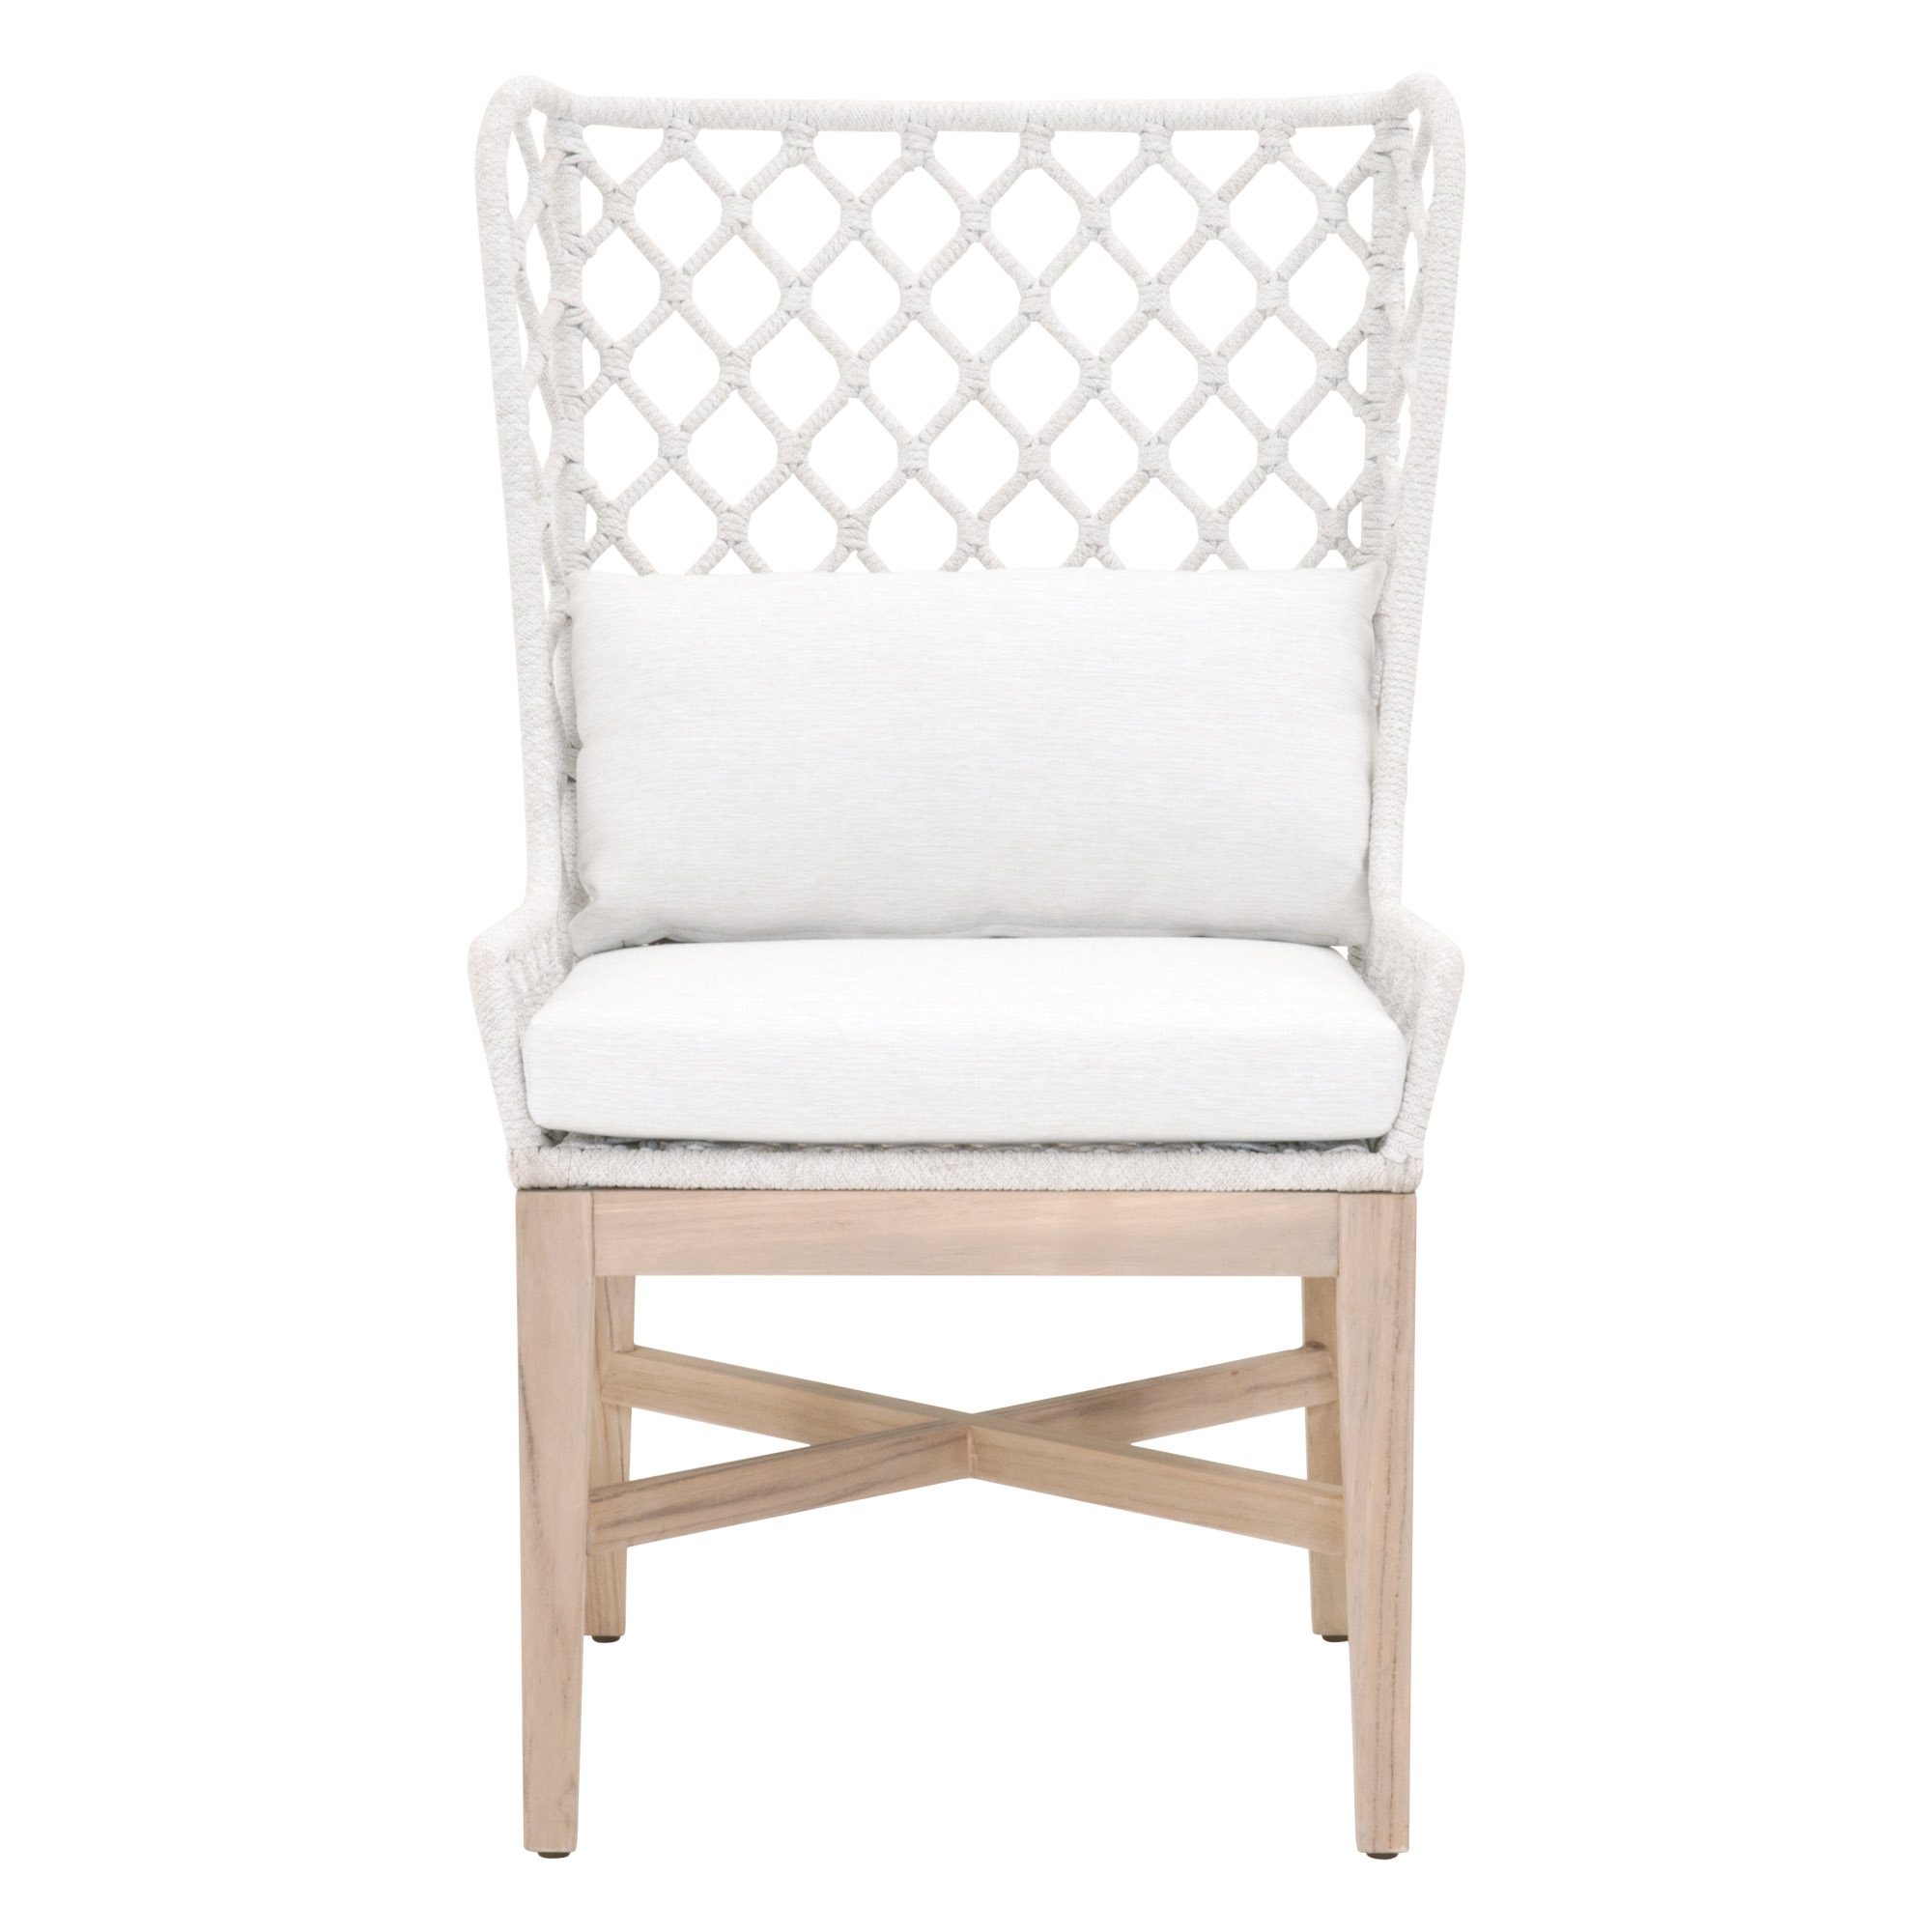 Lattis Outdoor Wing Chair, White - Image 0